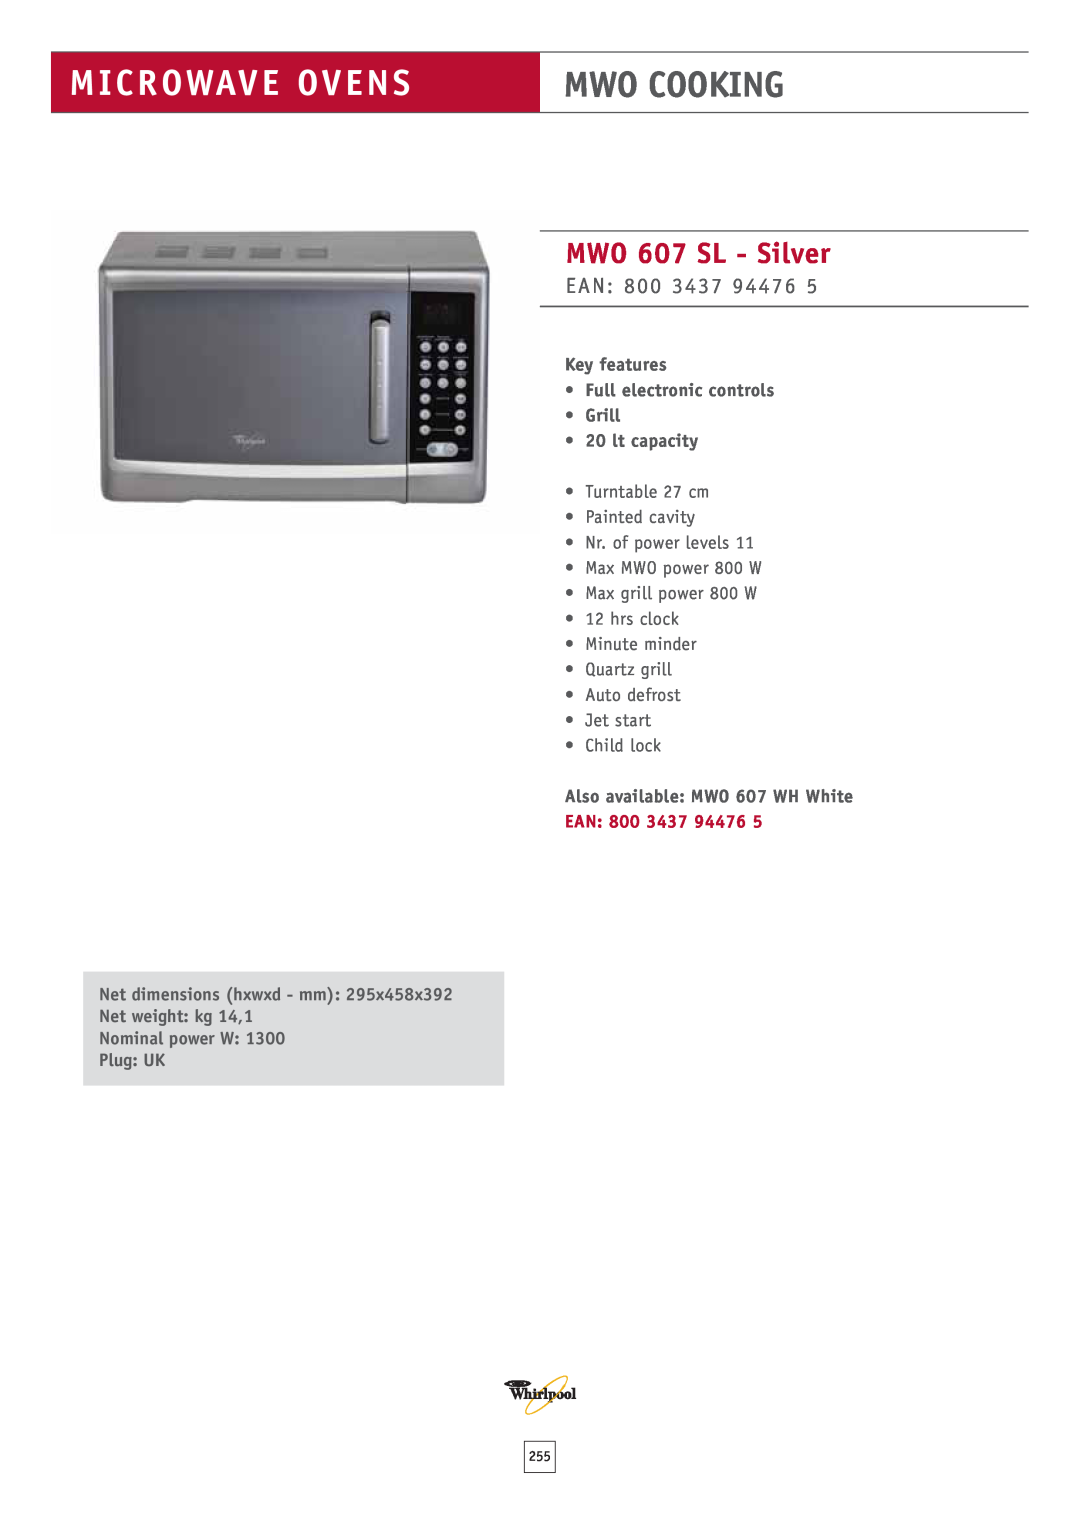 Whirlpool MWO 611 WH MWO 607 SL - Silver, Ean, lt capacity, Also available MWO 607 WH White, Microwave Ovens, Mwo Cooking 